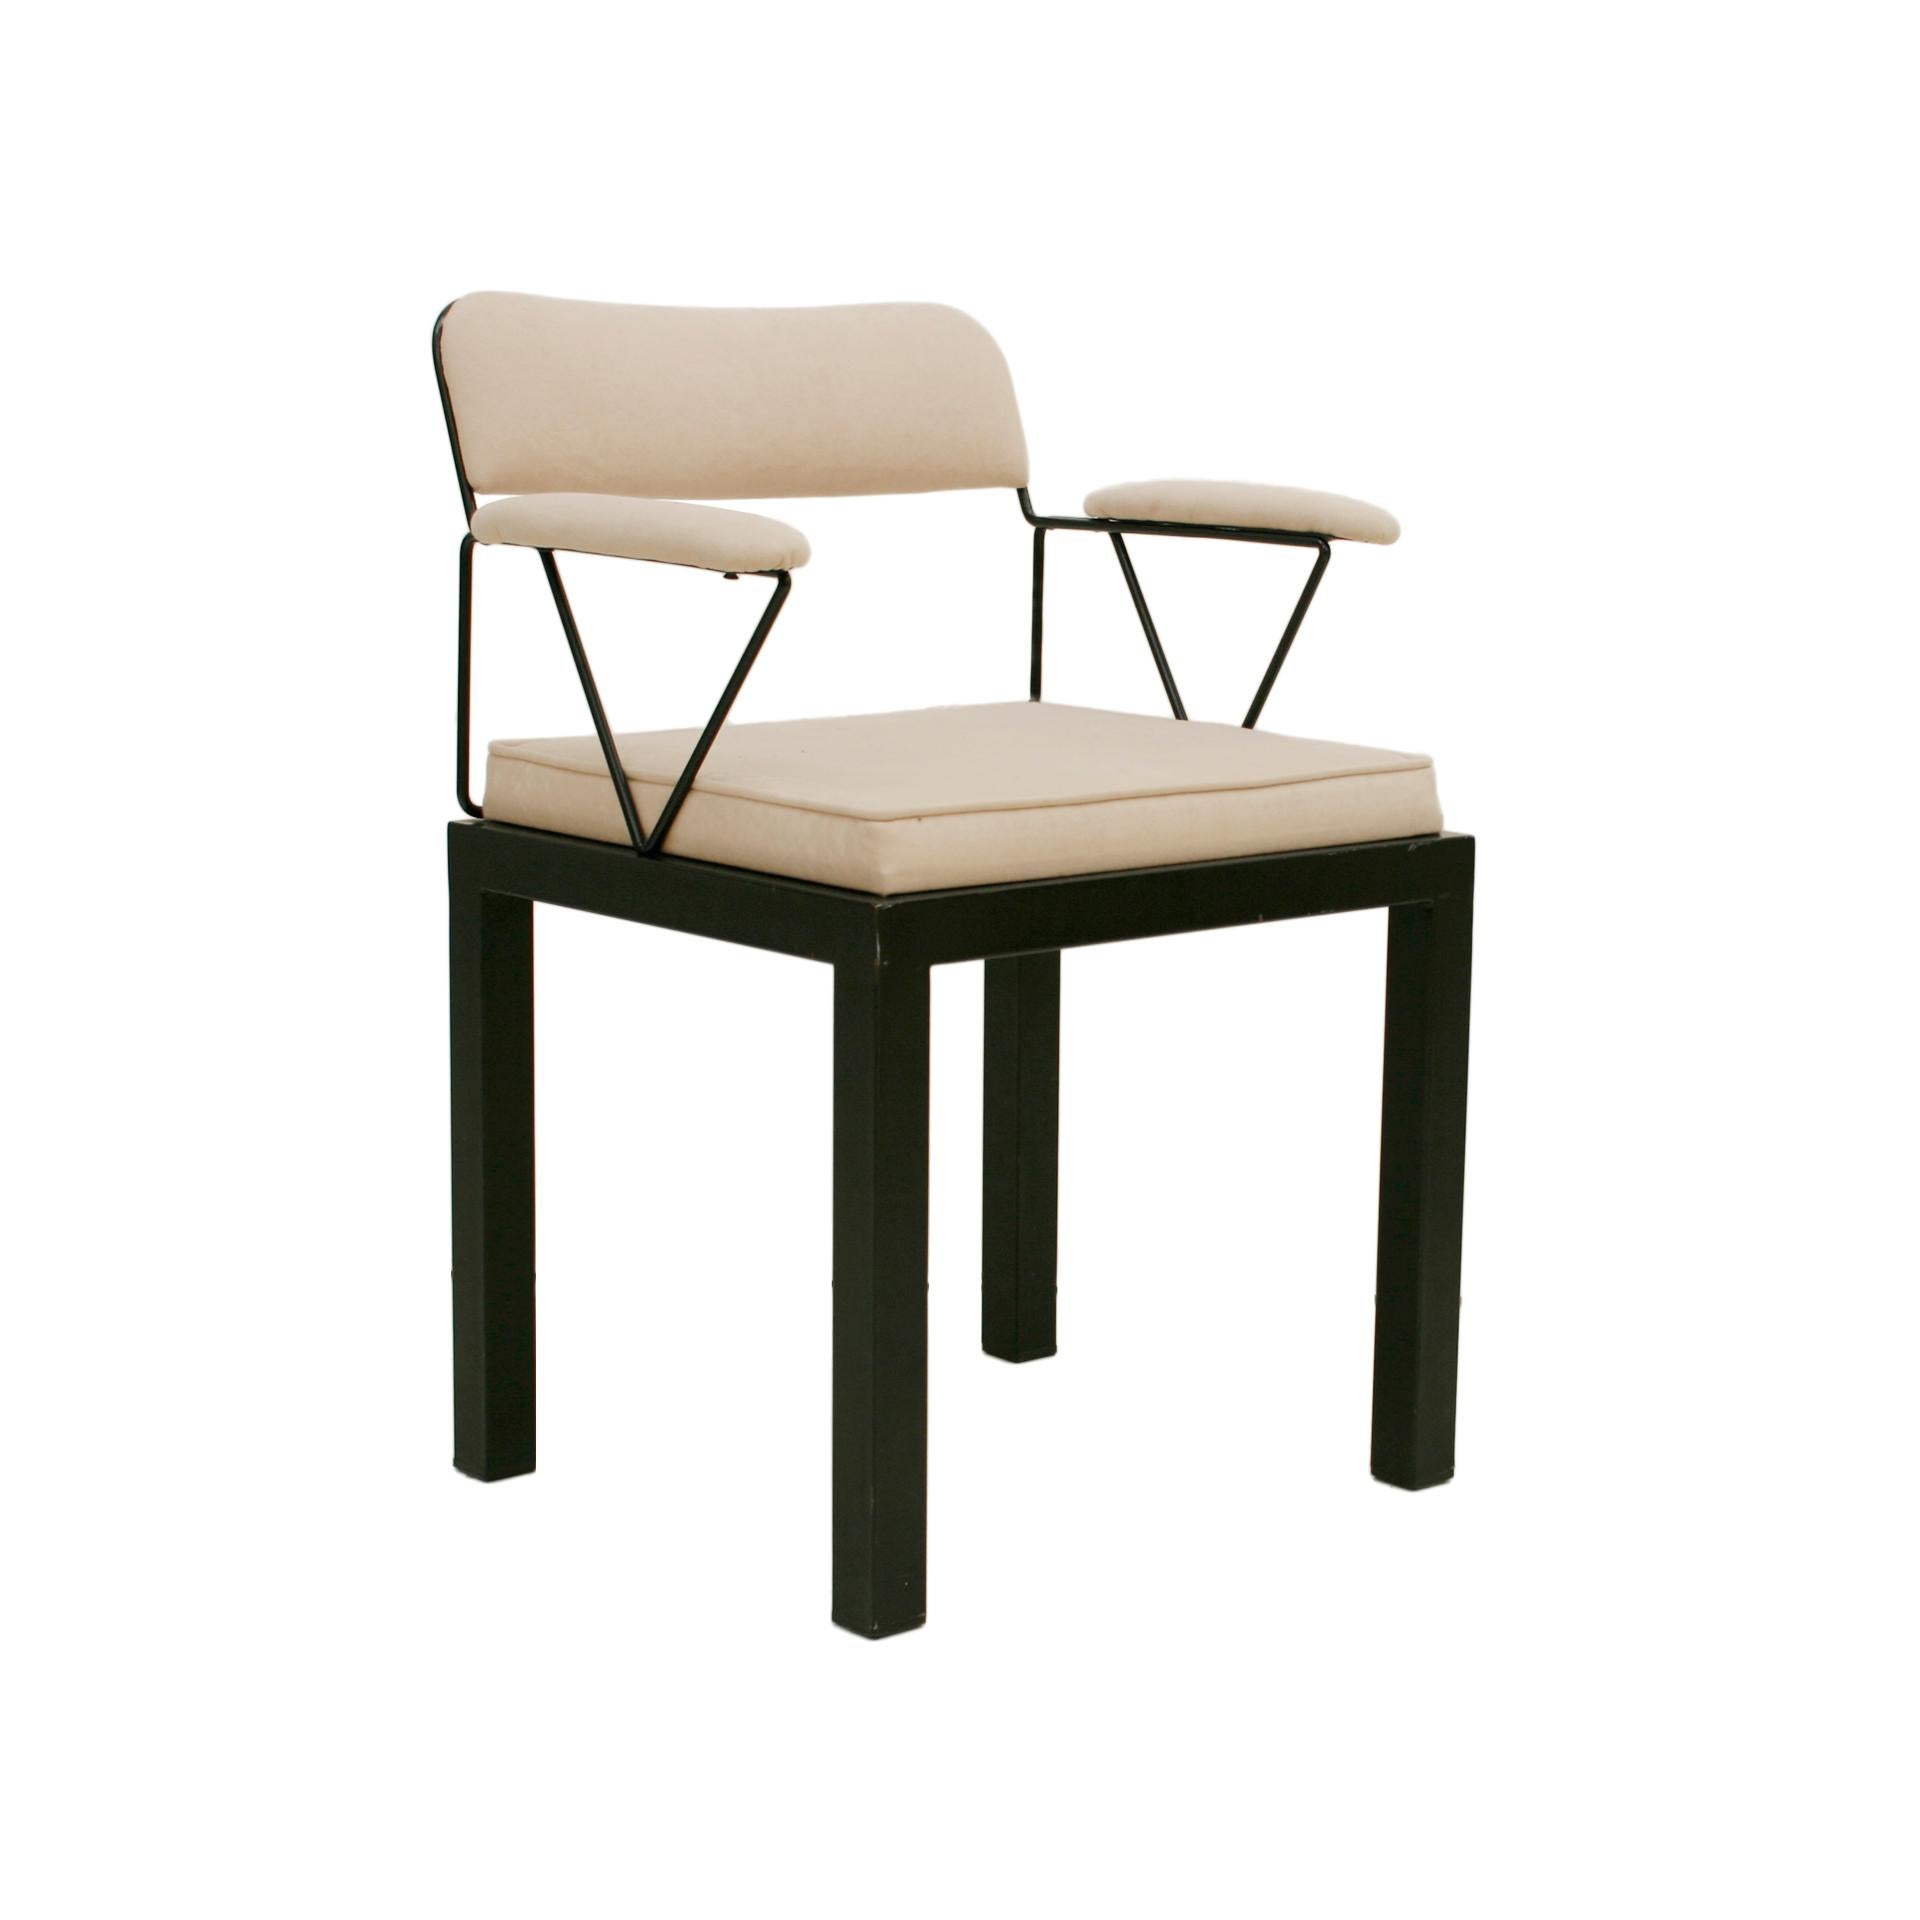 Set of 6 chairs mod. 